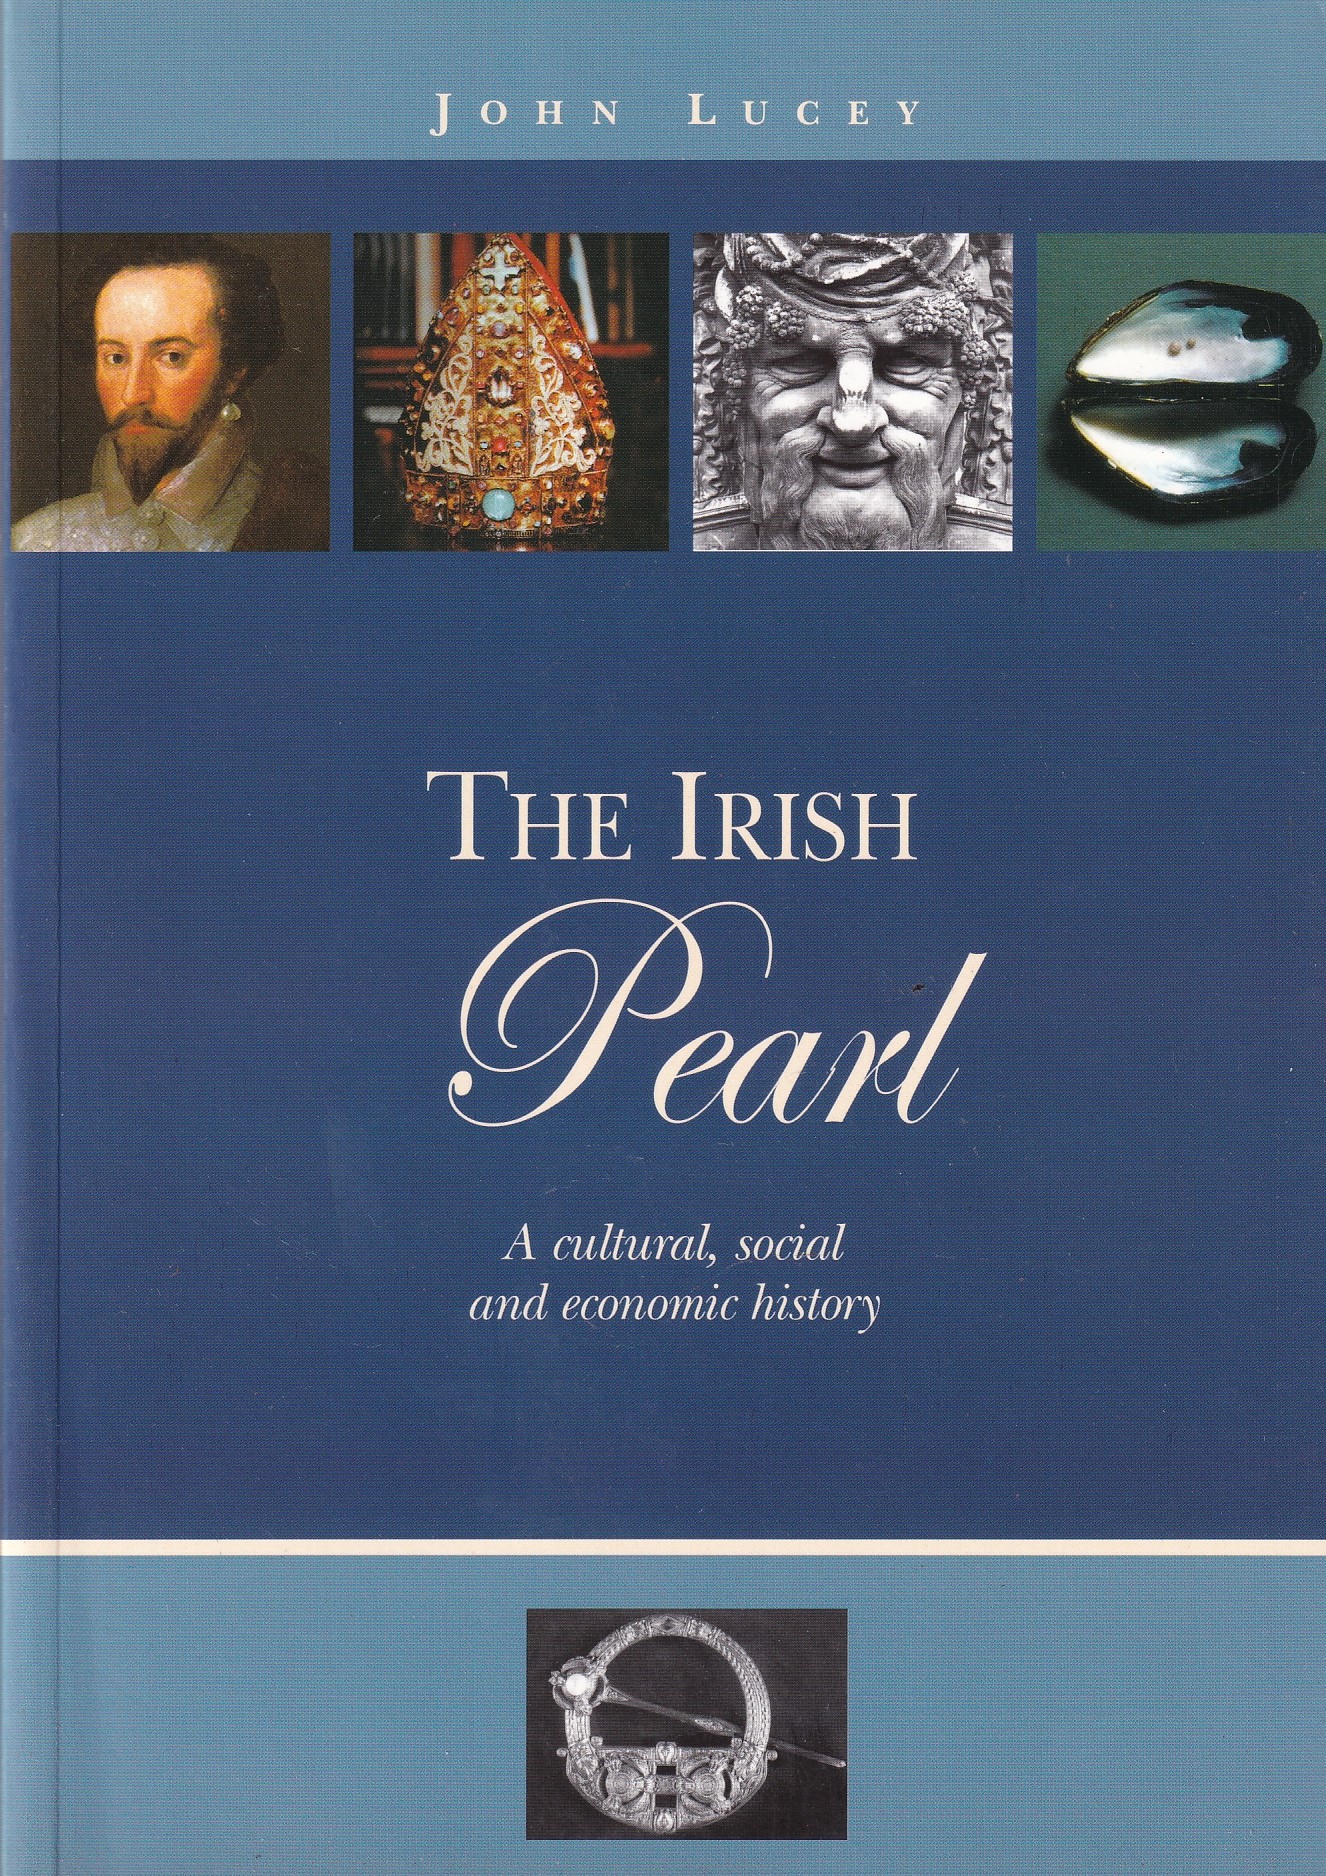 The Irish Pearl: A cultural, social and economic history by John Lucey